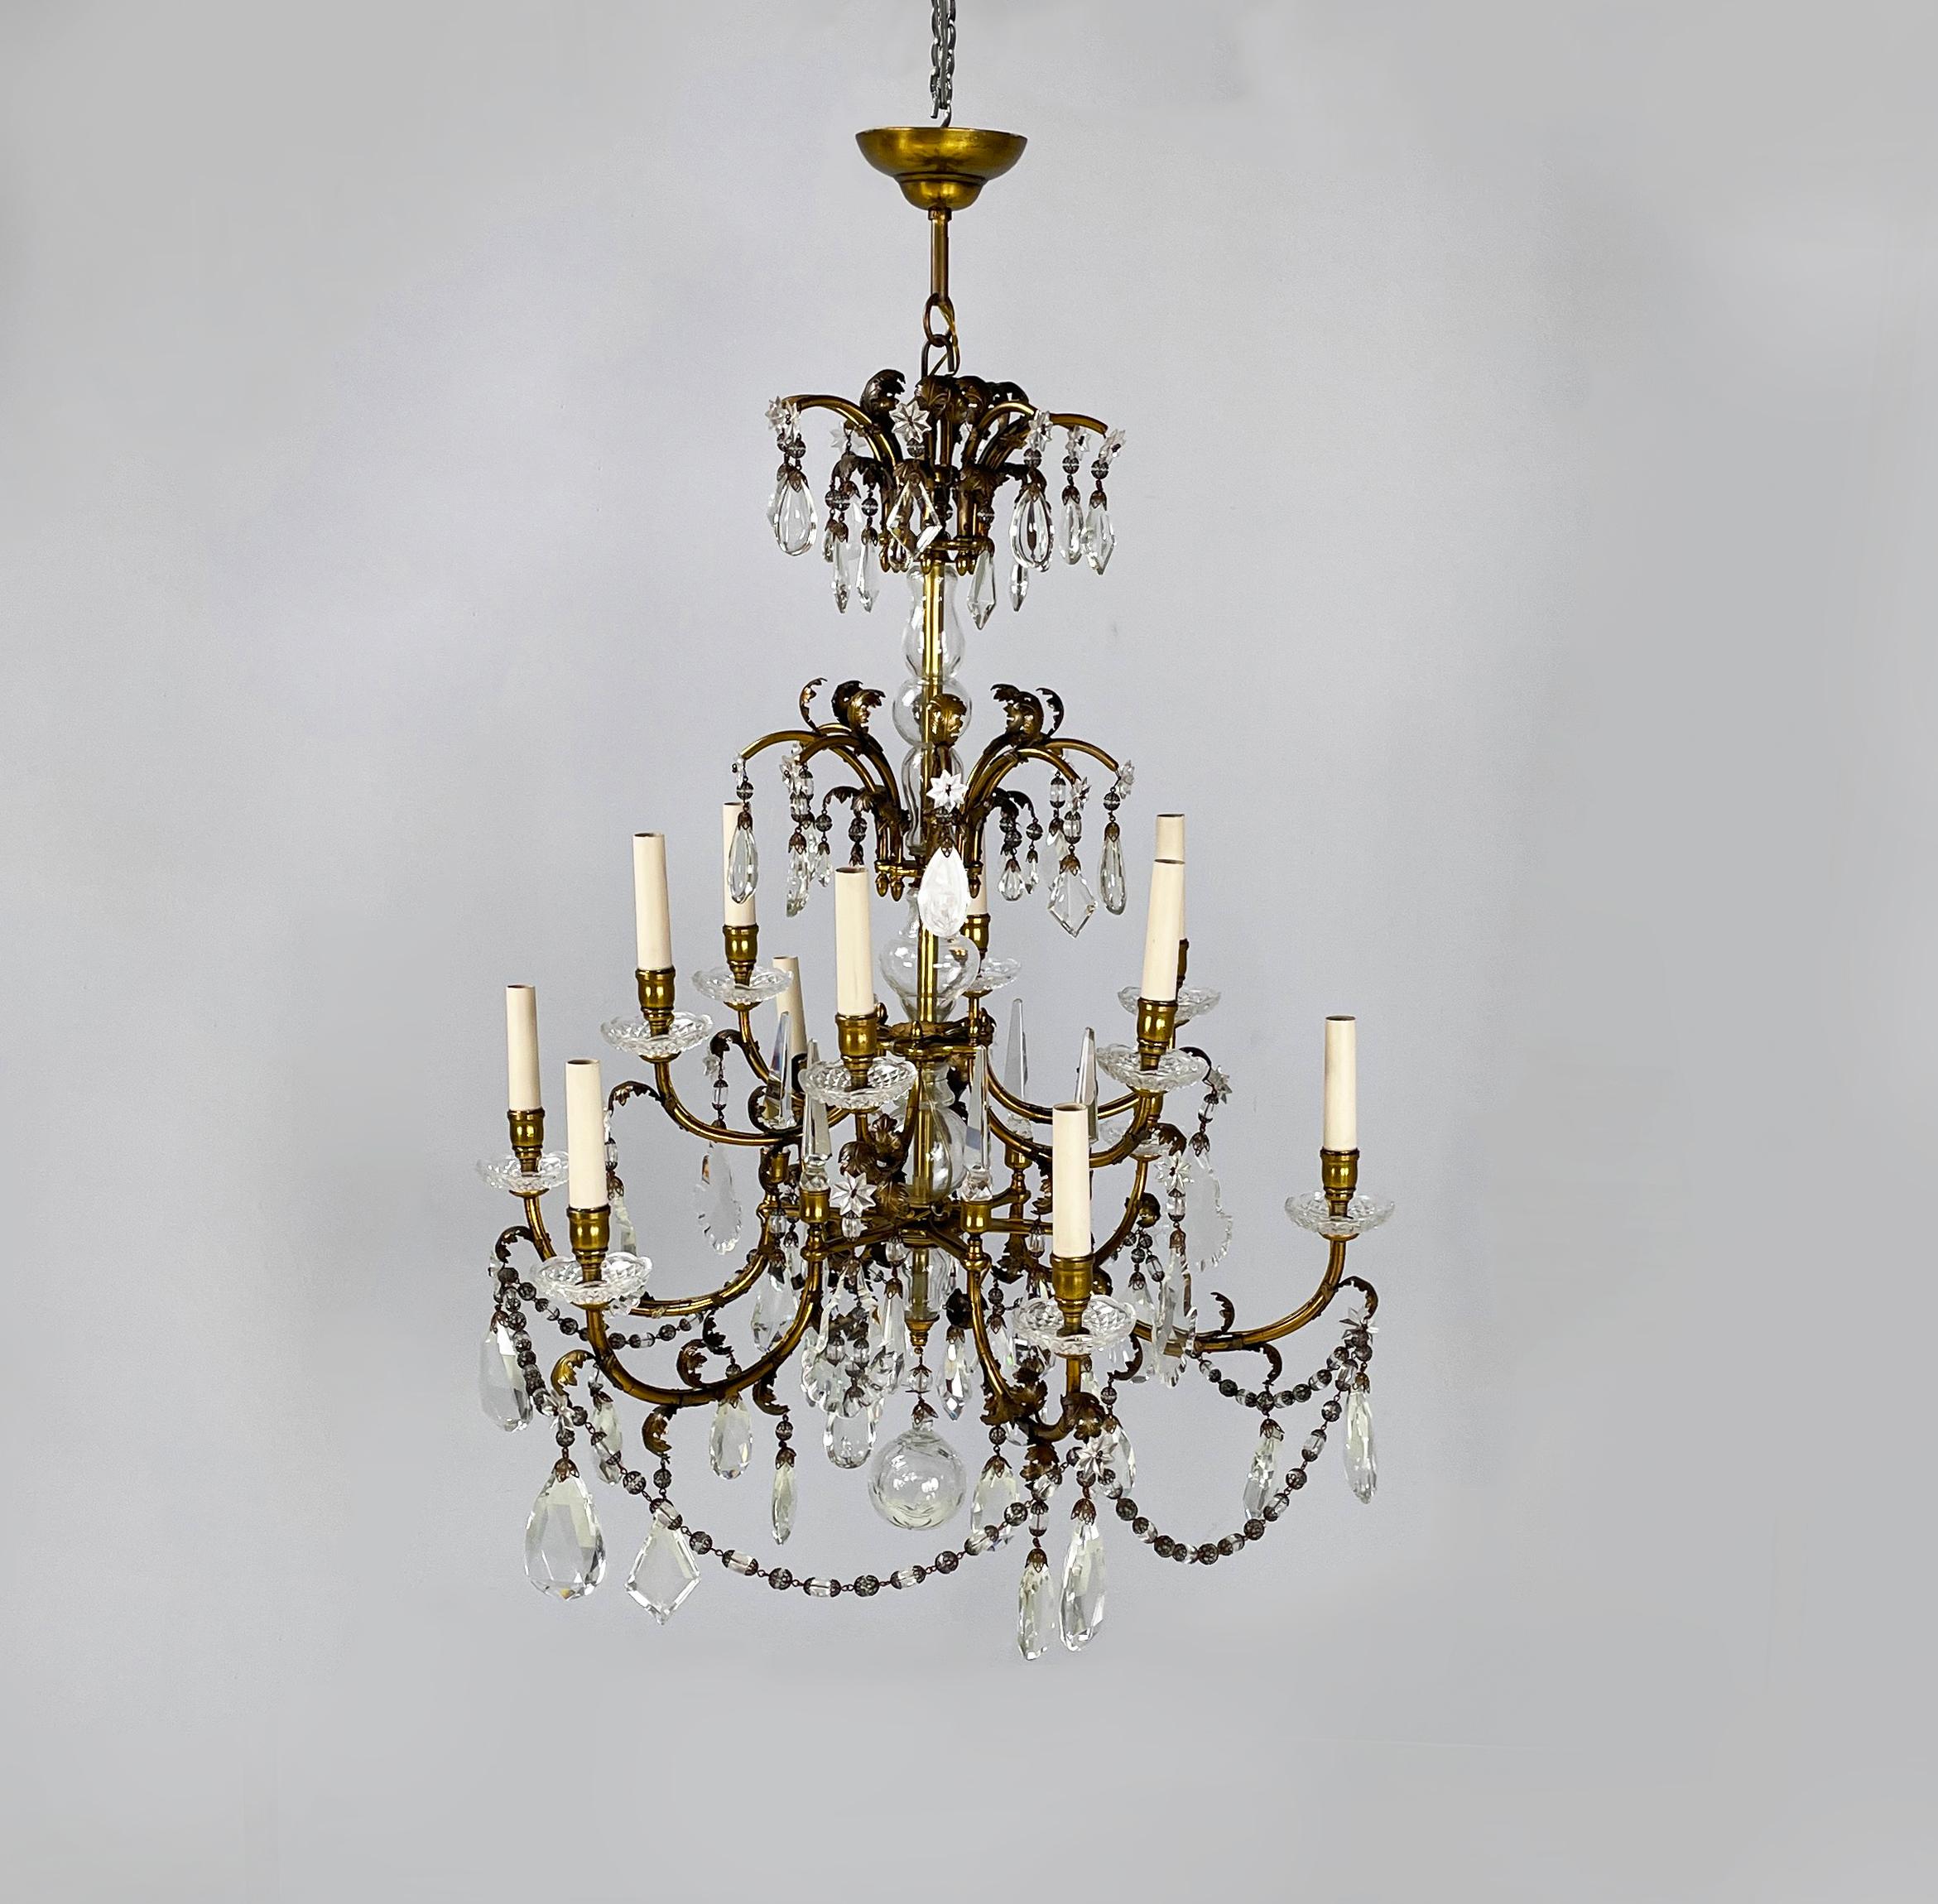 Italian arte deco Glass drop chandelier with brass structure, 1900-1950s
Drop chandelier with round base. The brass structure is composed of a central brass tubular with 12 curved arms, divided into two levels of different heights, and shorter arms